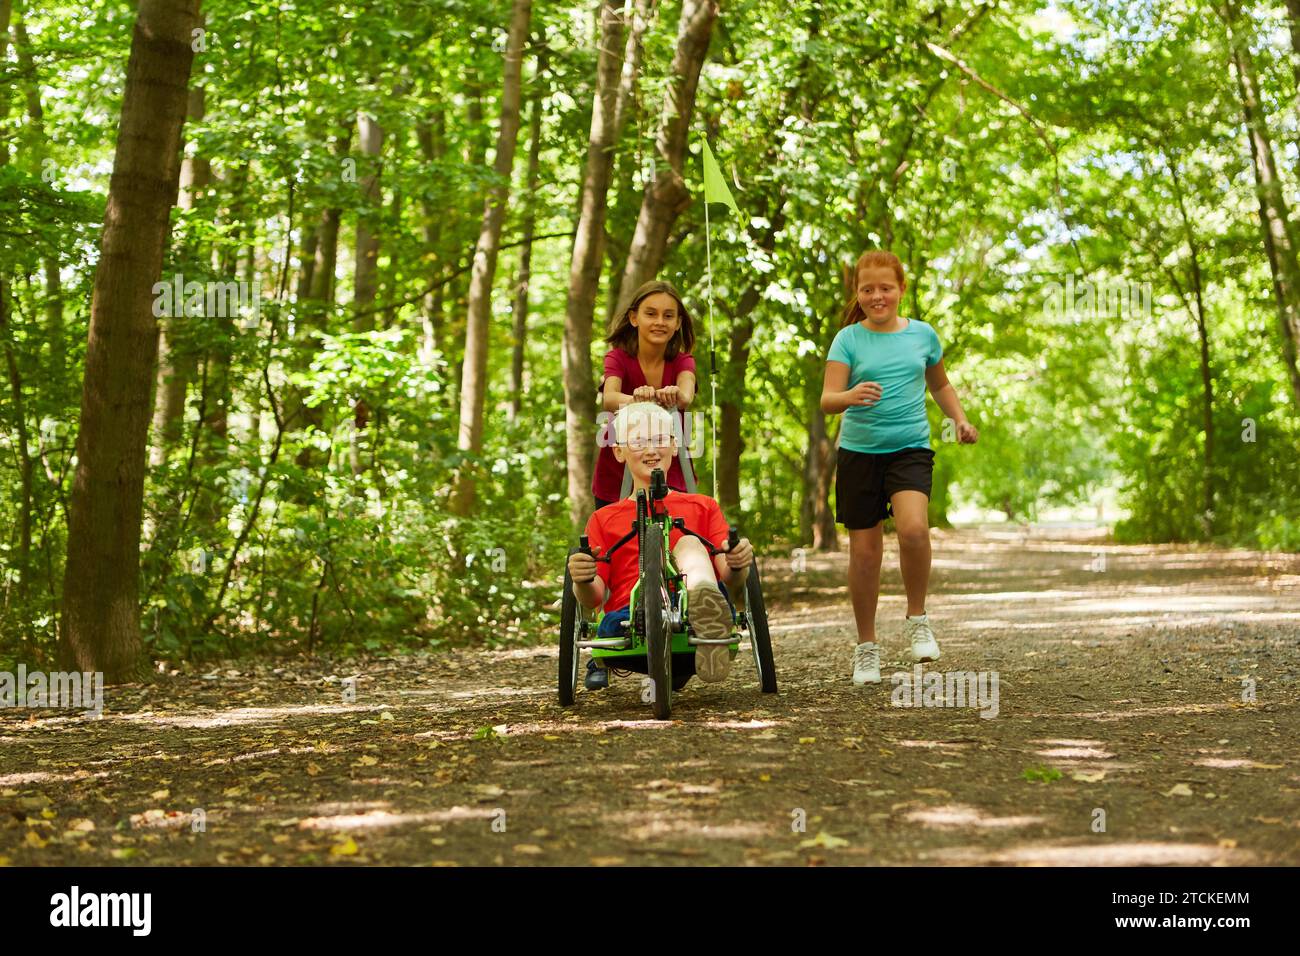 Playful girl running with disabled boy riding recumbent bike on footpath at forest Stock Photo